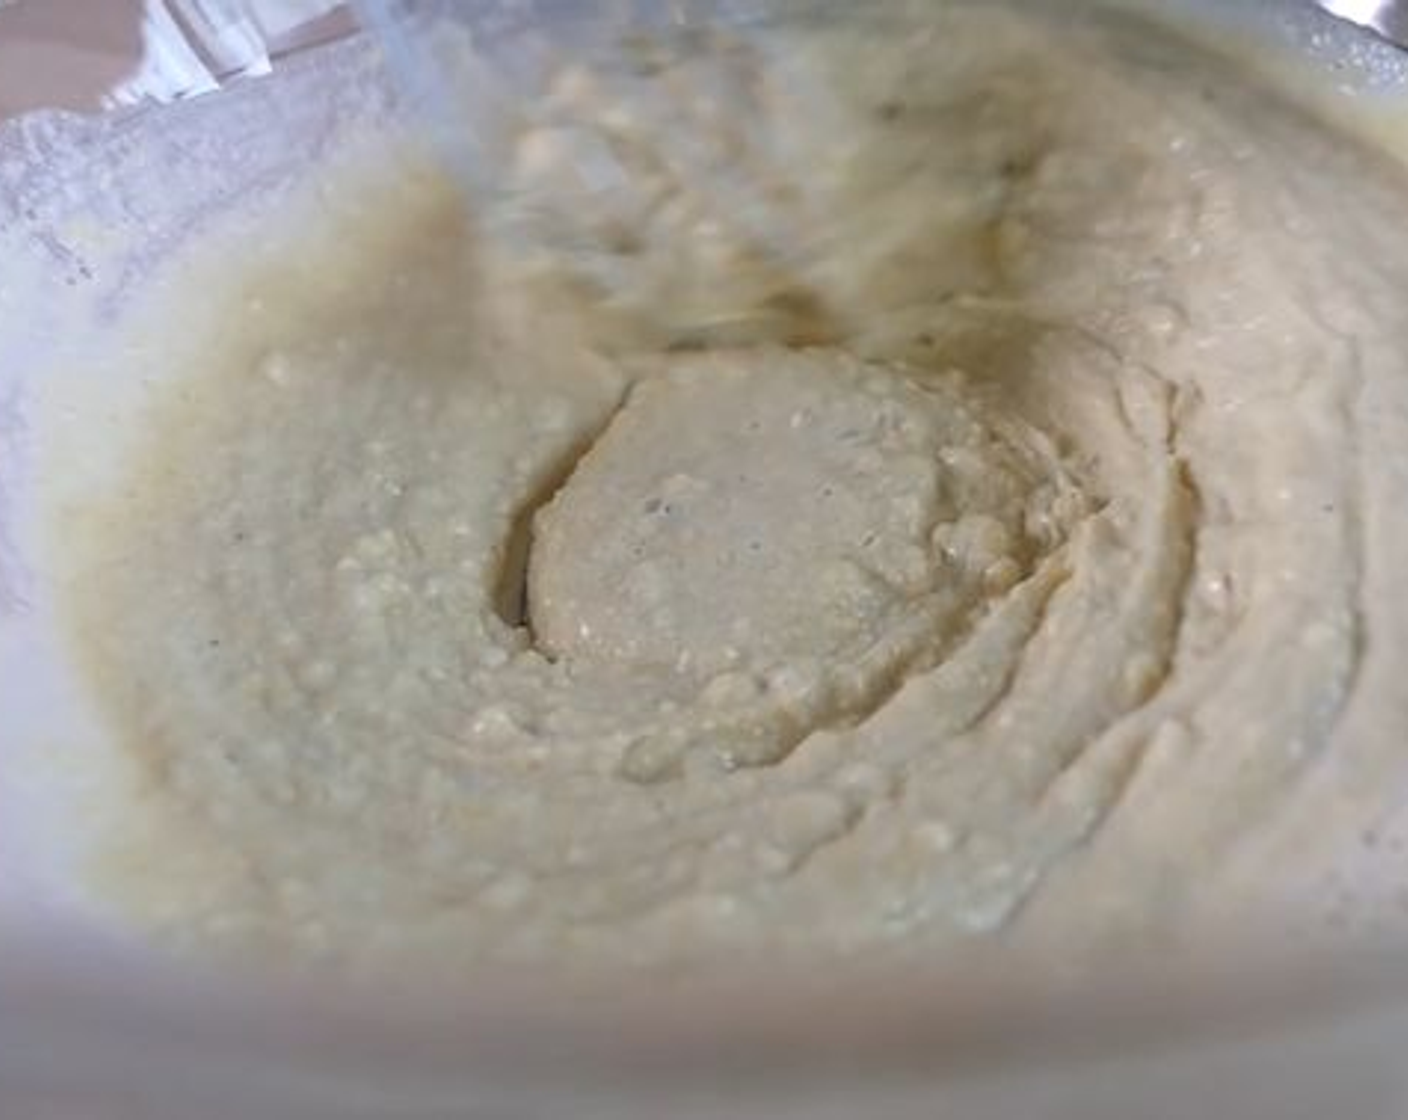 step 2 In a large bowl, whisk to combine Fine Ground Cornmeal (3/4 cup), All-Purpose Flour (3/4 cup), Baking Powder (1/2 Tbsp), Granulated Sugar (2 1/2 Tbsp), Sea Salt (1/4 tsp), and Ground Black Pepper (1/4 tsp). In a separate bowl, whisk together the Unsweetened Soy Milk (3/4 cup) and Aquafaba (1/4 cup). Mix the wet ingredients into the dry, until well combined. You can also do this in a food processor or blender.